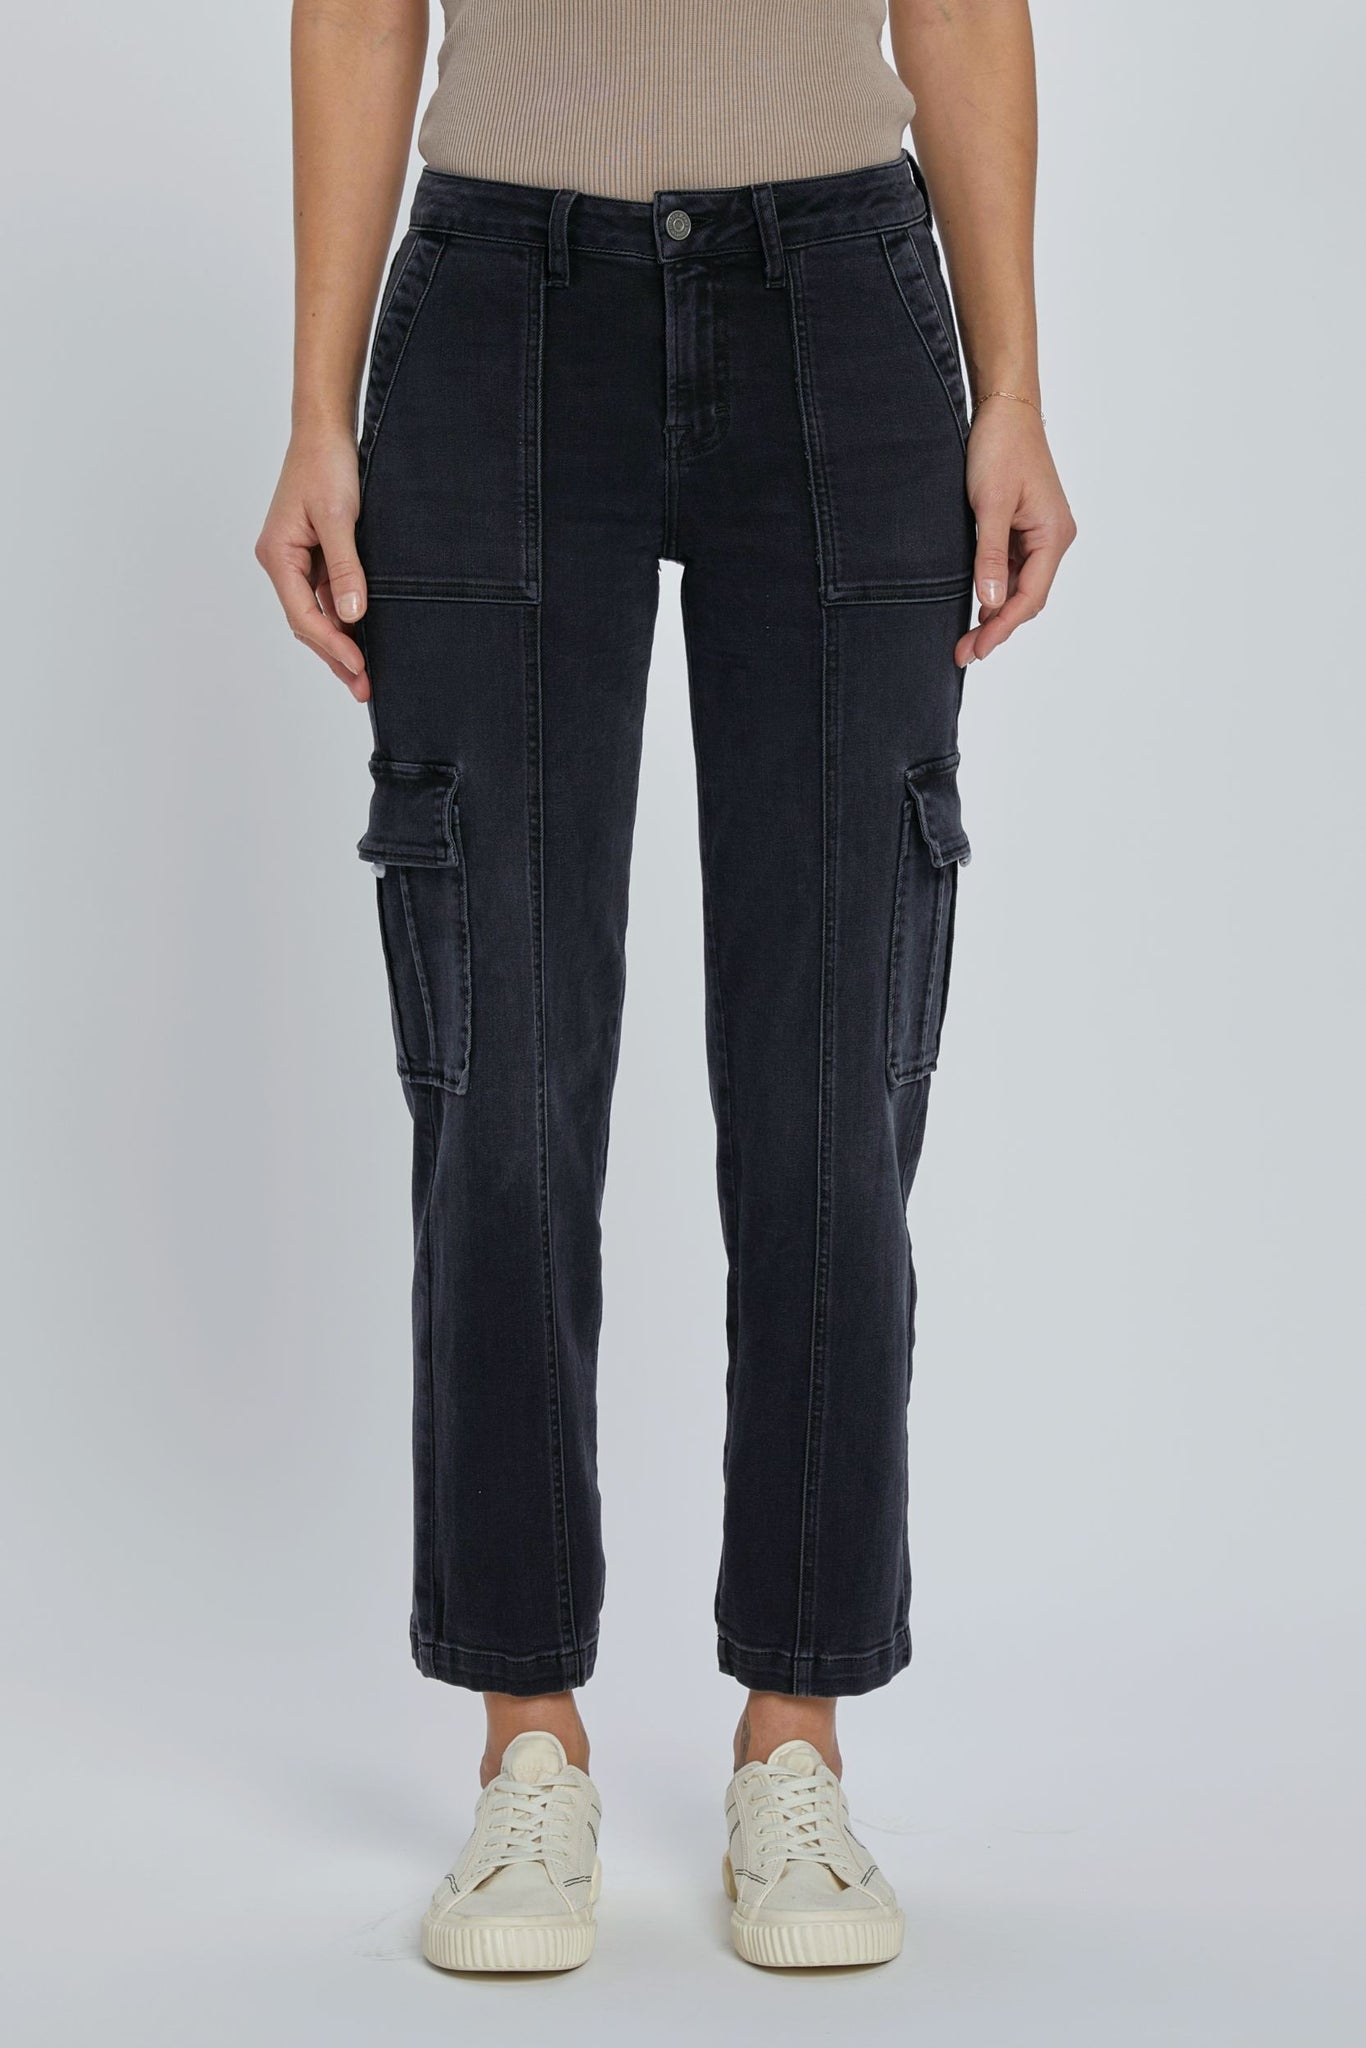 Hidden -Tracey Stretchy Cropped Cargo Jean -BLACK